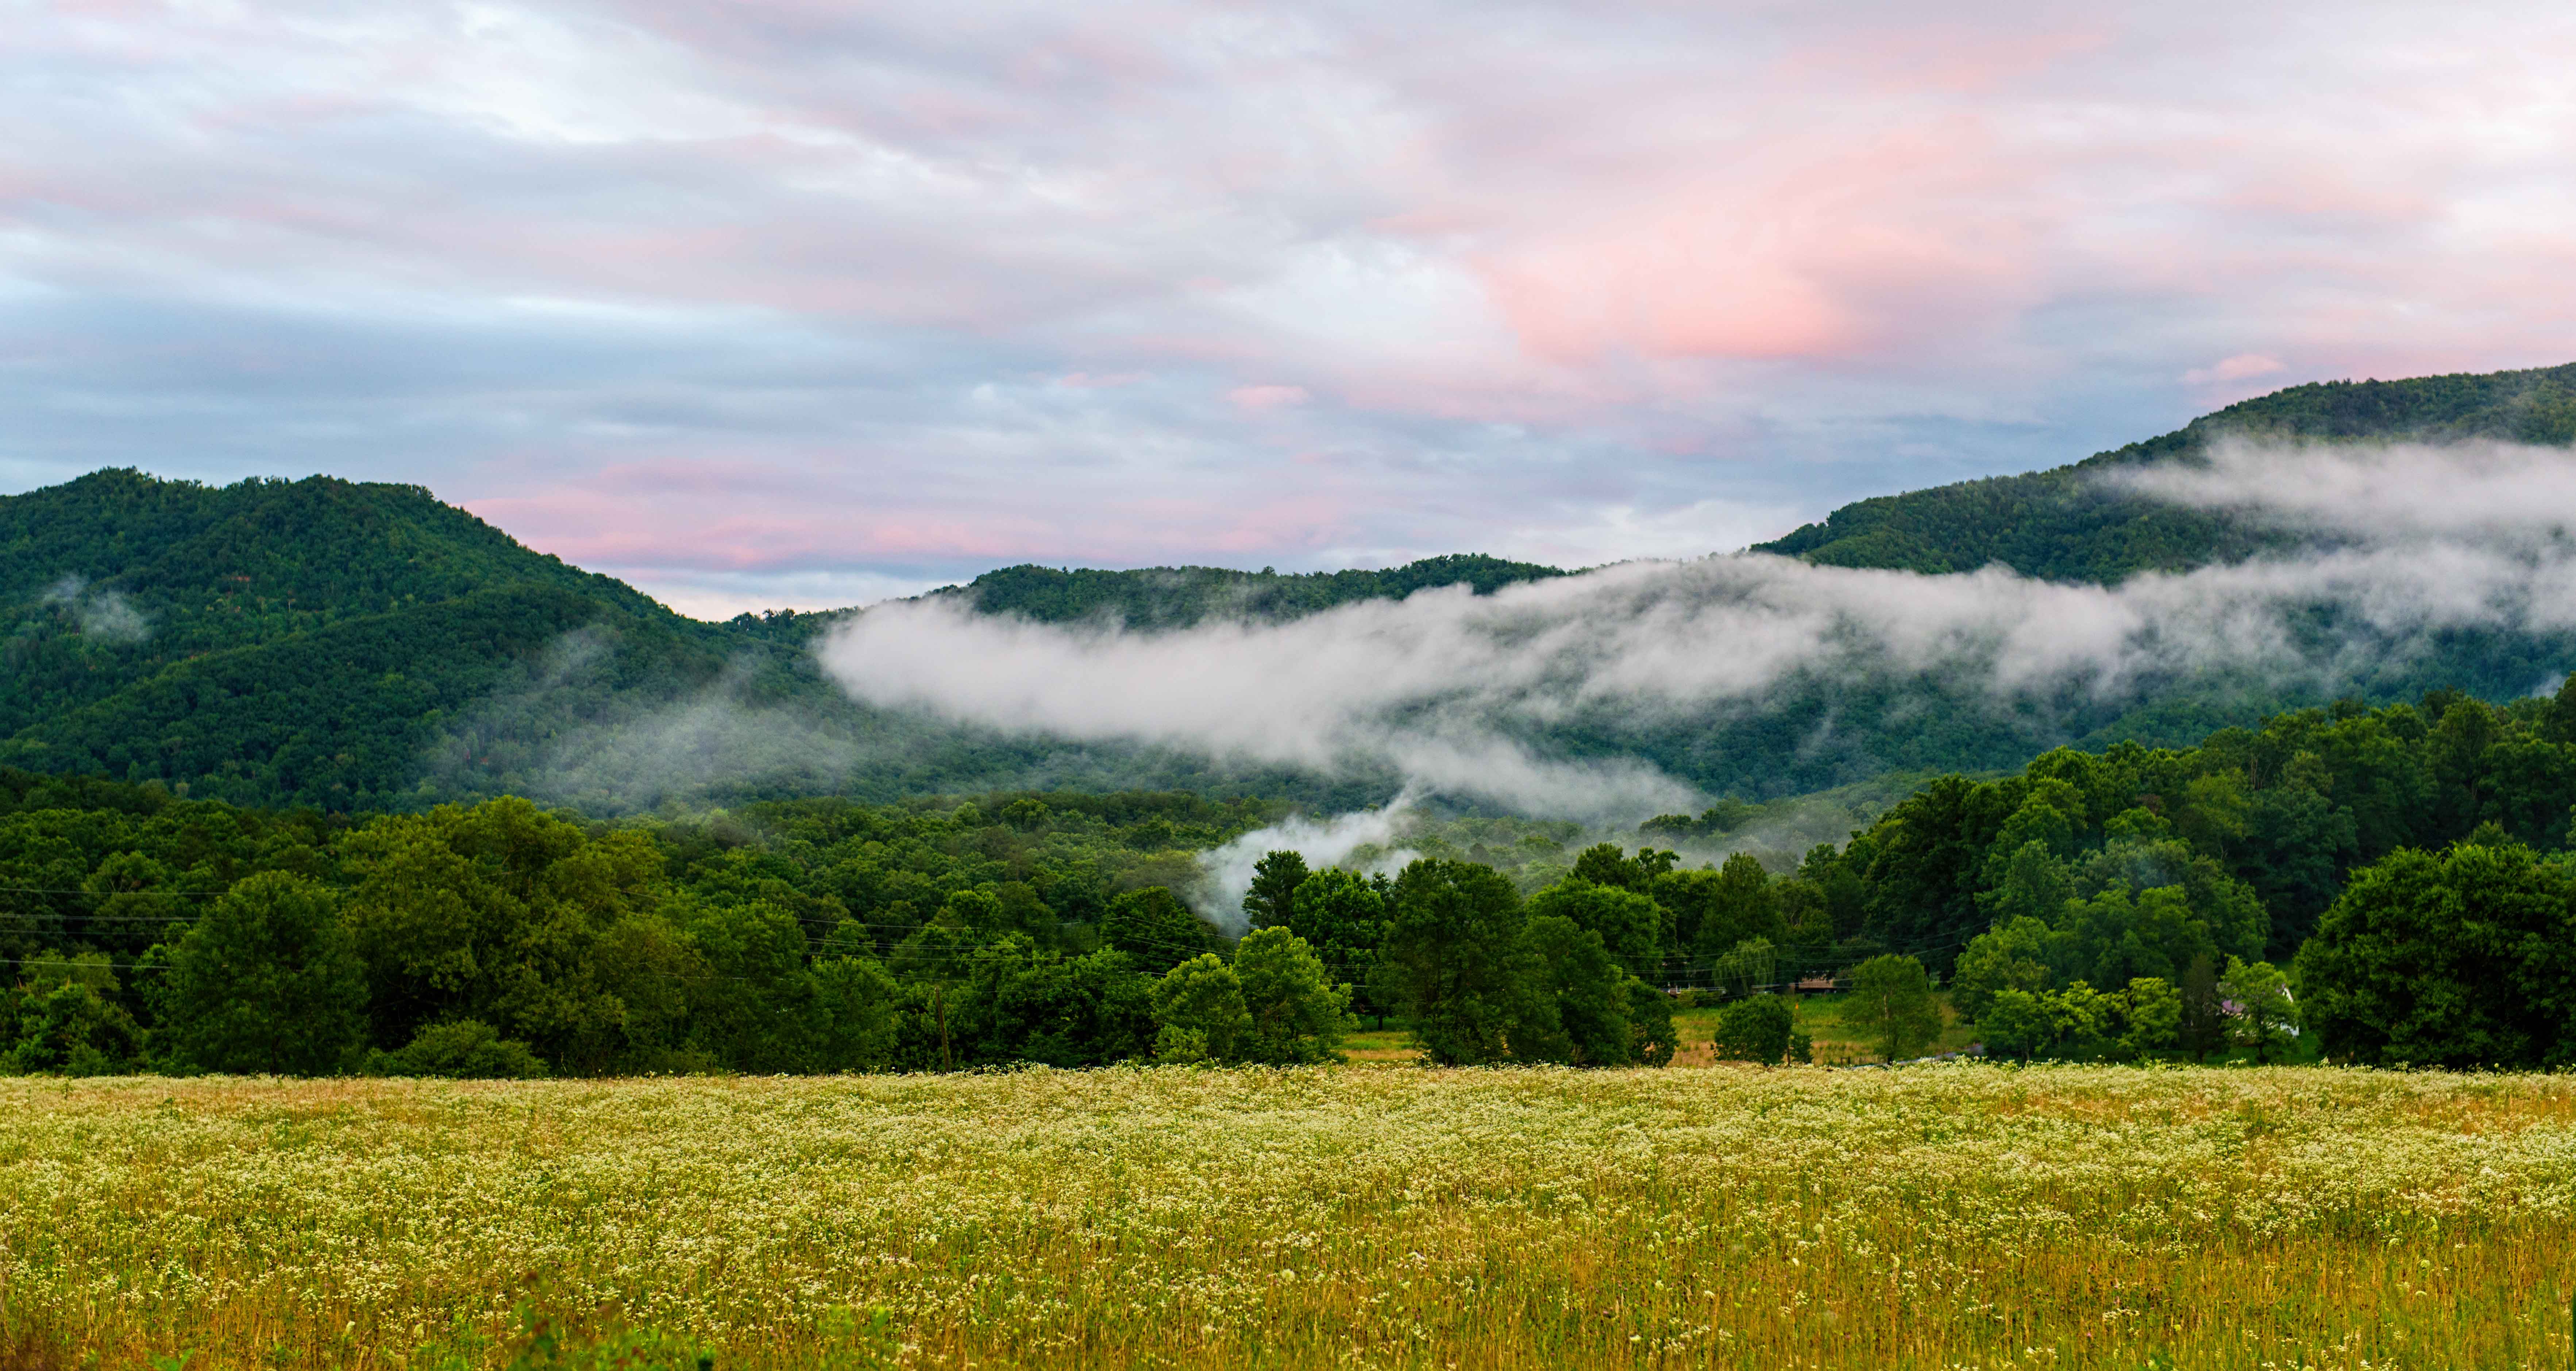 Great Smoky Mountains Image Thecelebritypix